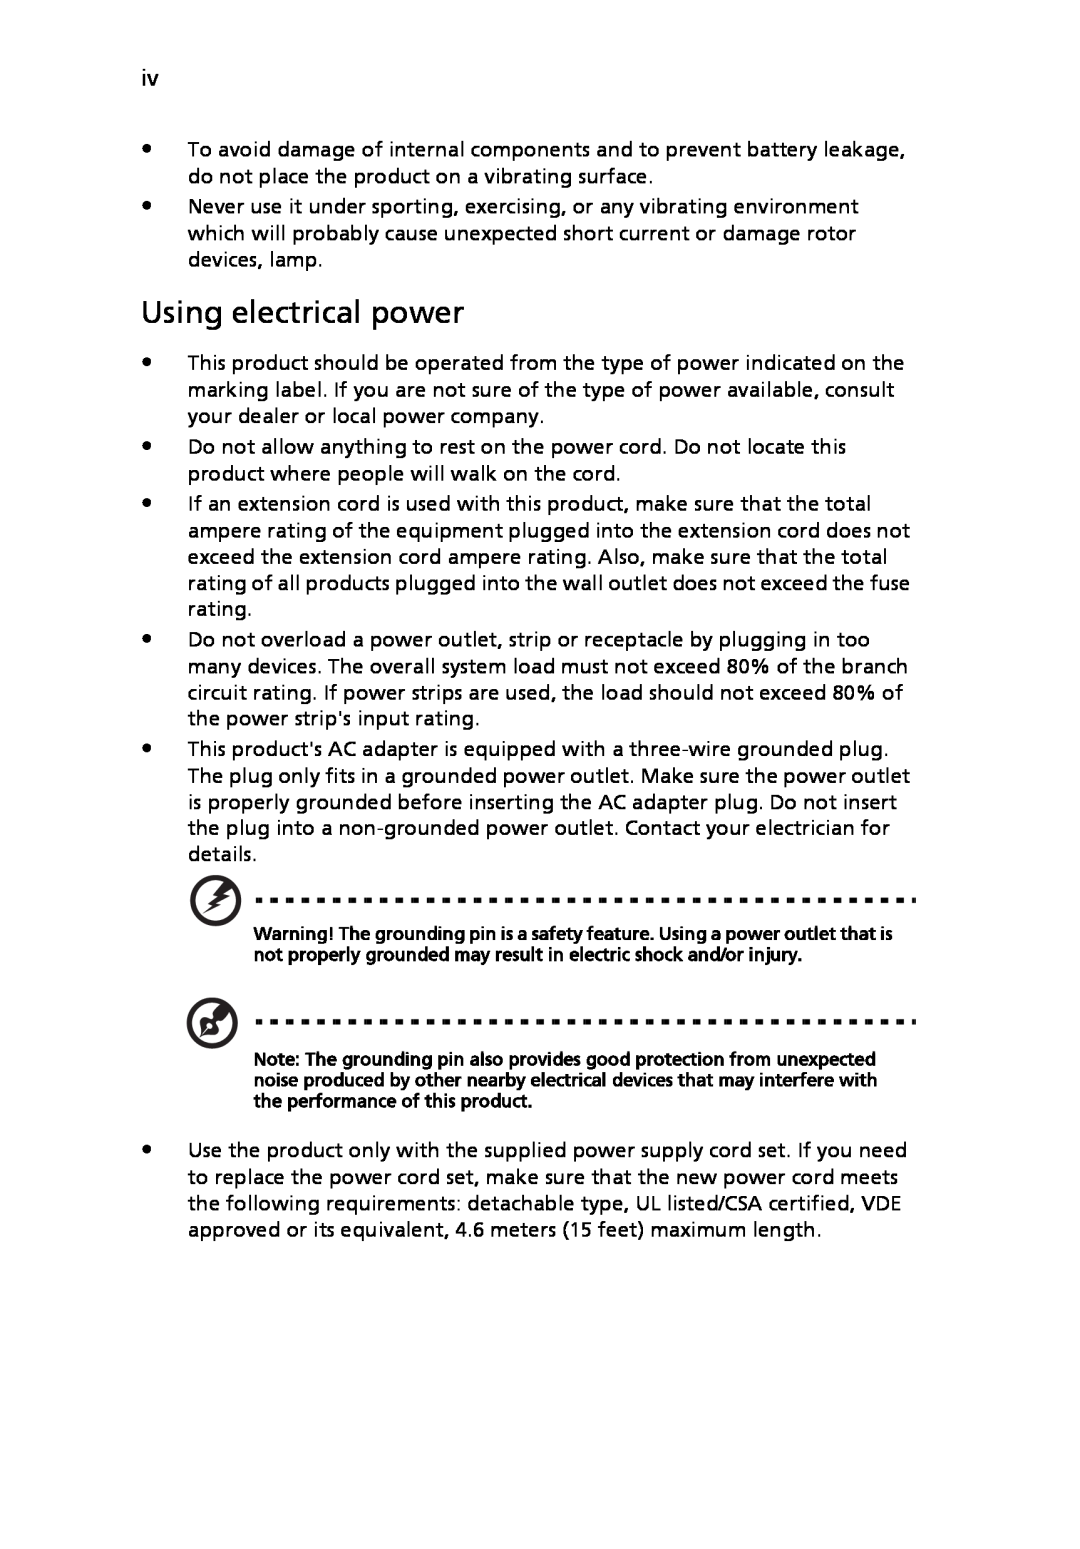 Acer P5205 manual Using electrical power 